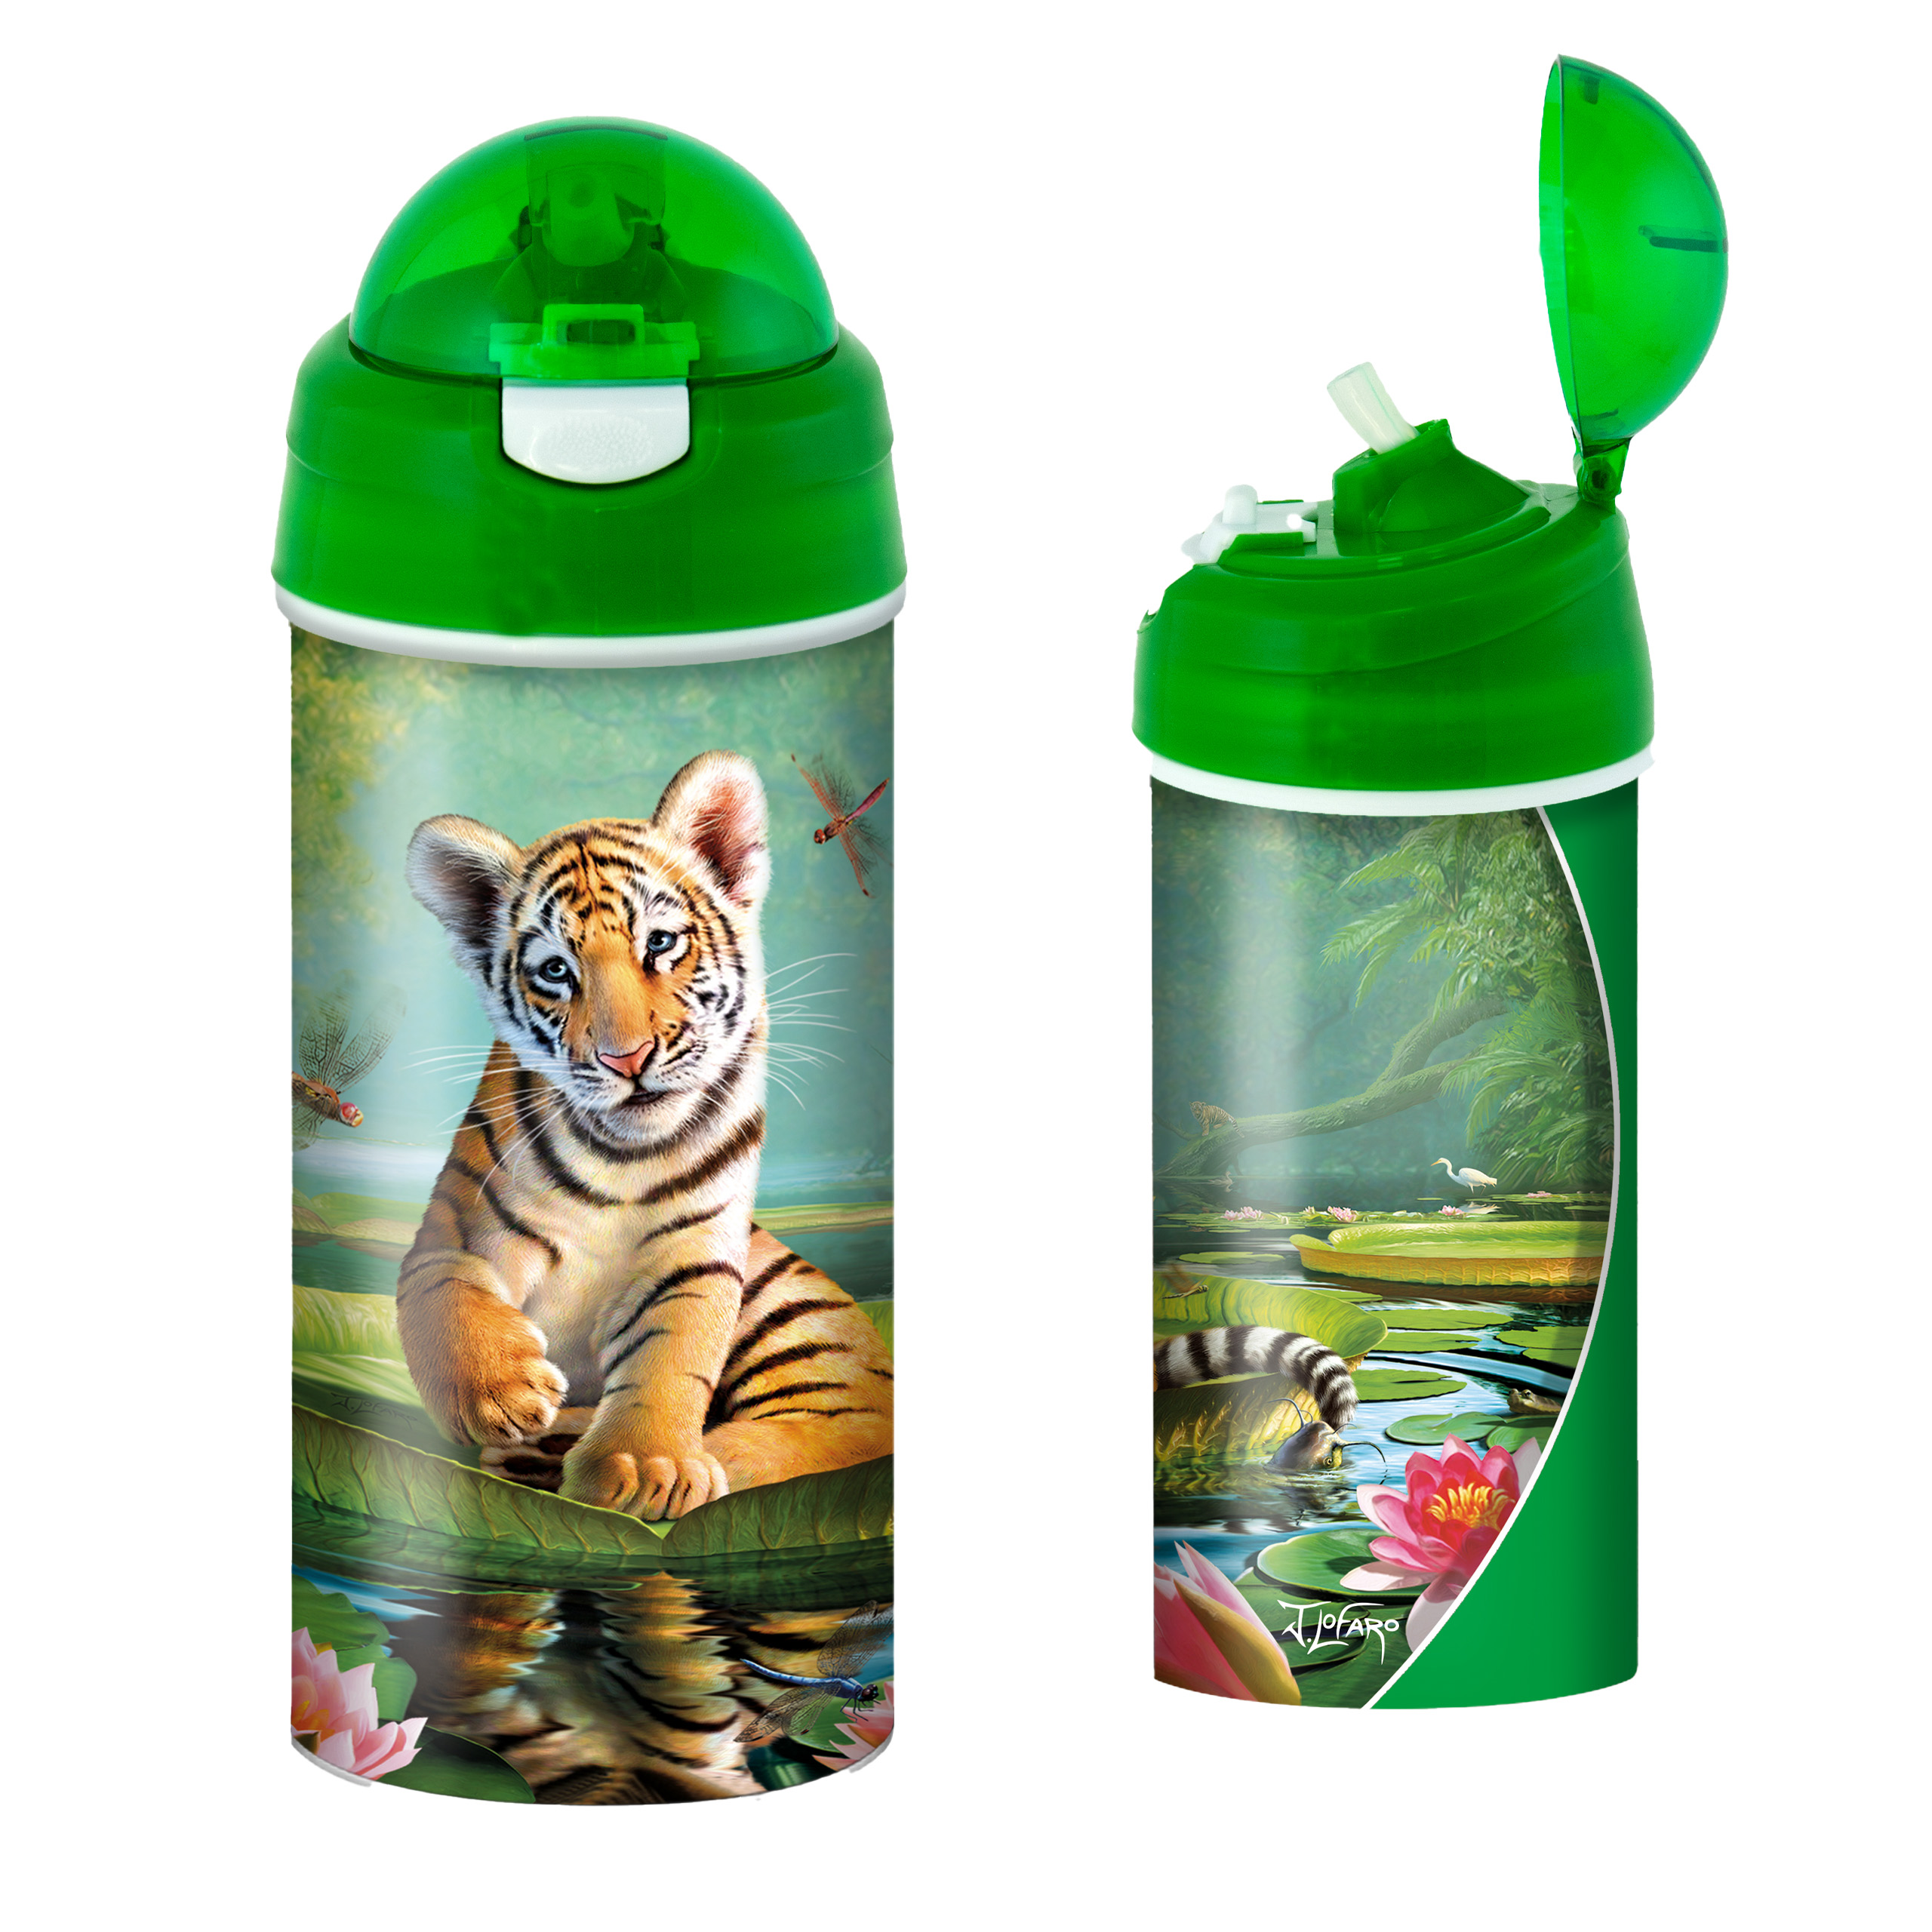 3D LiveLife Drinking Bottle - Tiger Lily from Deluxebase. 3D Lenticular Big Cat Water Bottle with Straw. 20oz kids water bottle with original artwork from renowned artist, Jerry LoFaro - image 1 of 2